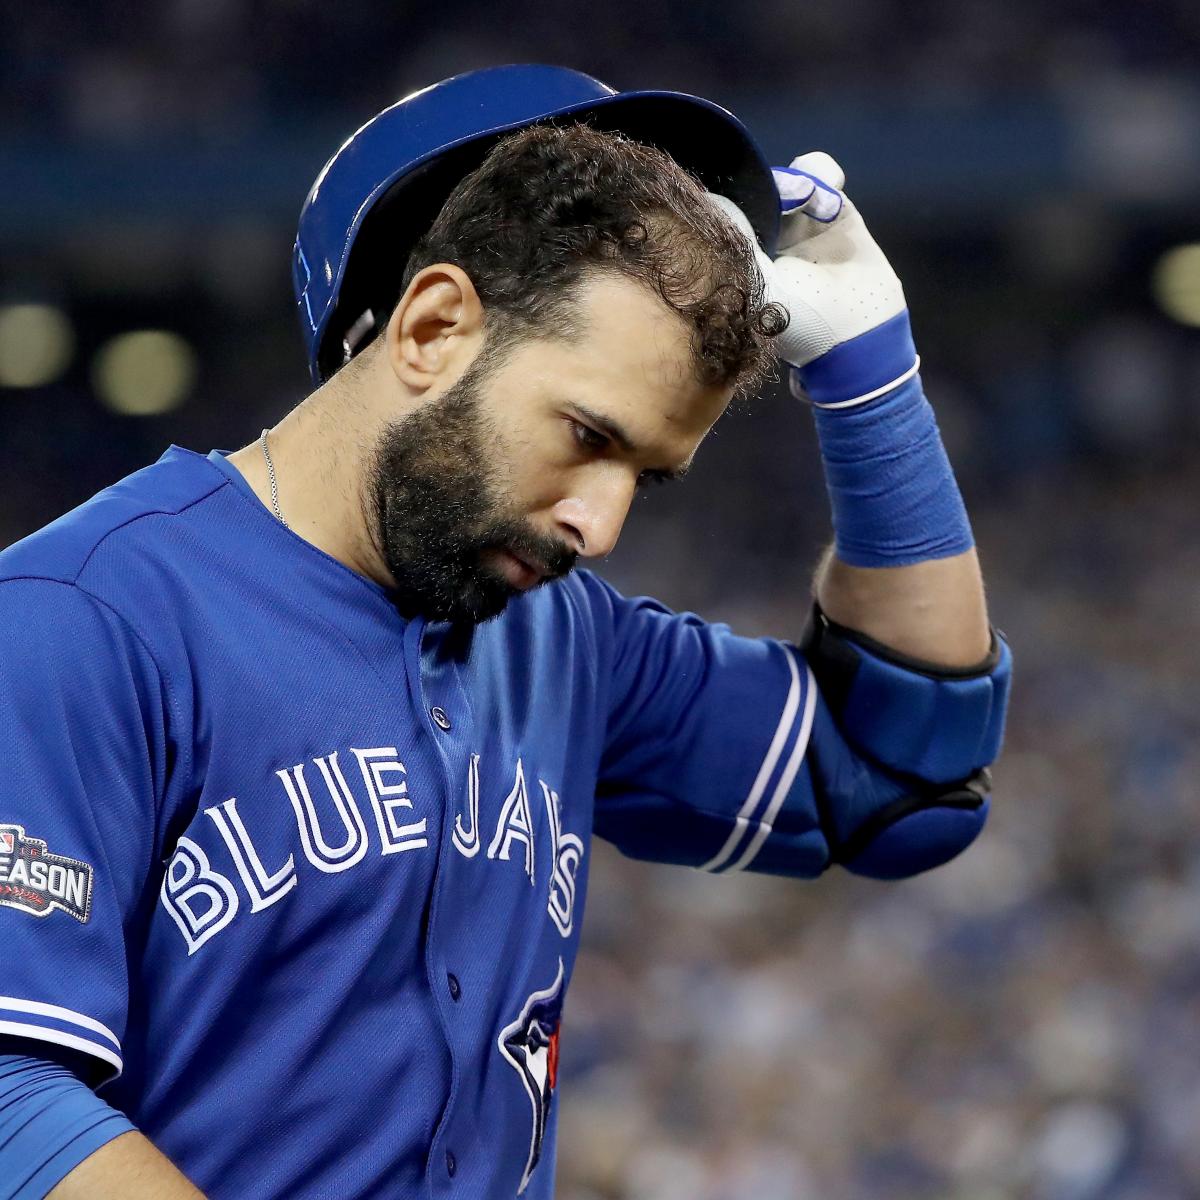 Former big league slugger José Bautista signs one-day contract to retire  with Blue Jays - The San Diego Union-Tribune